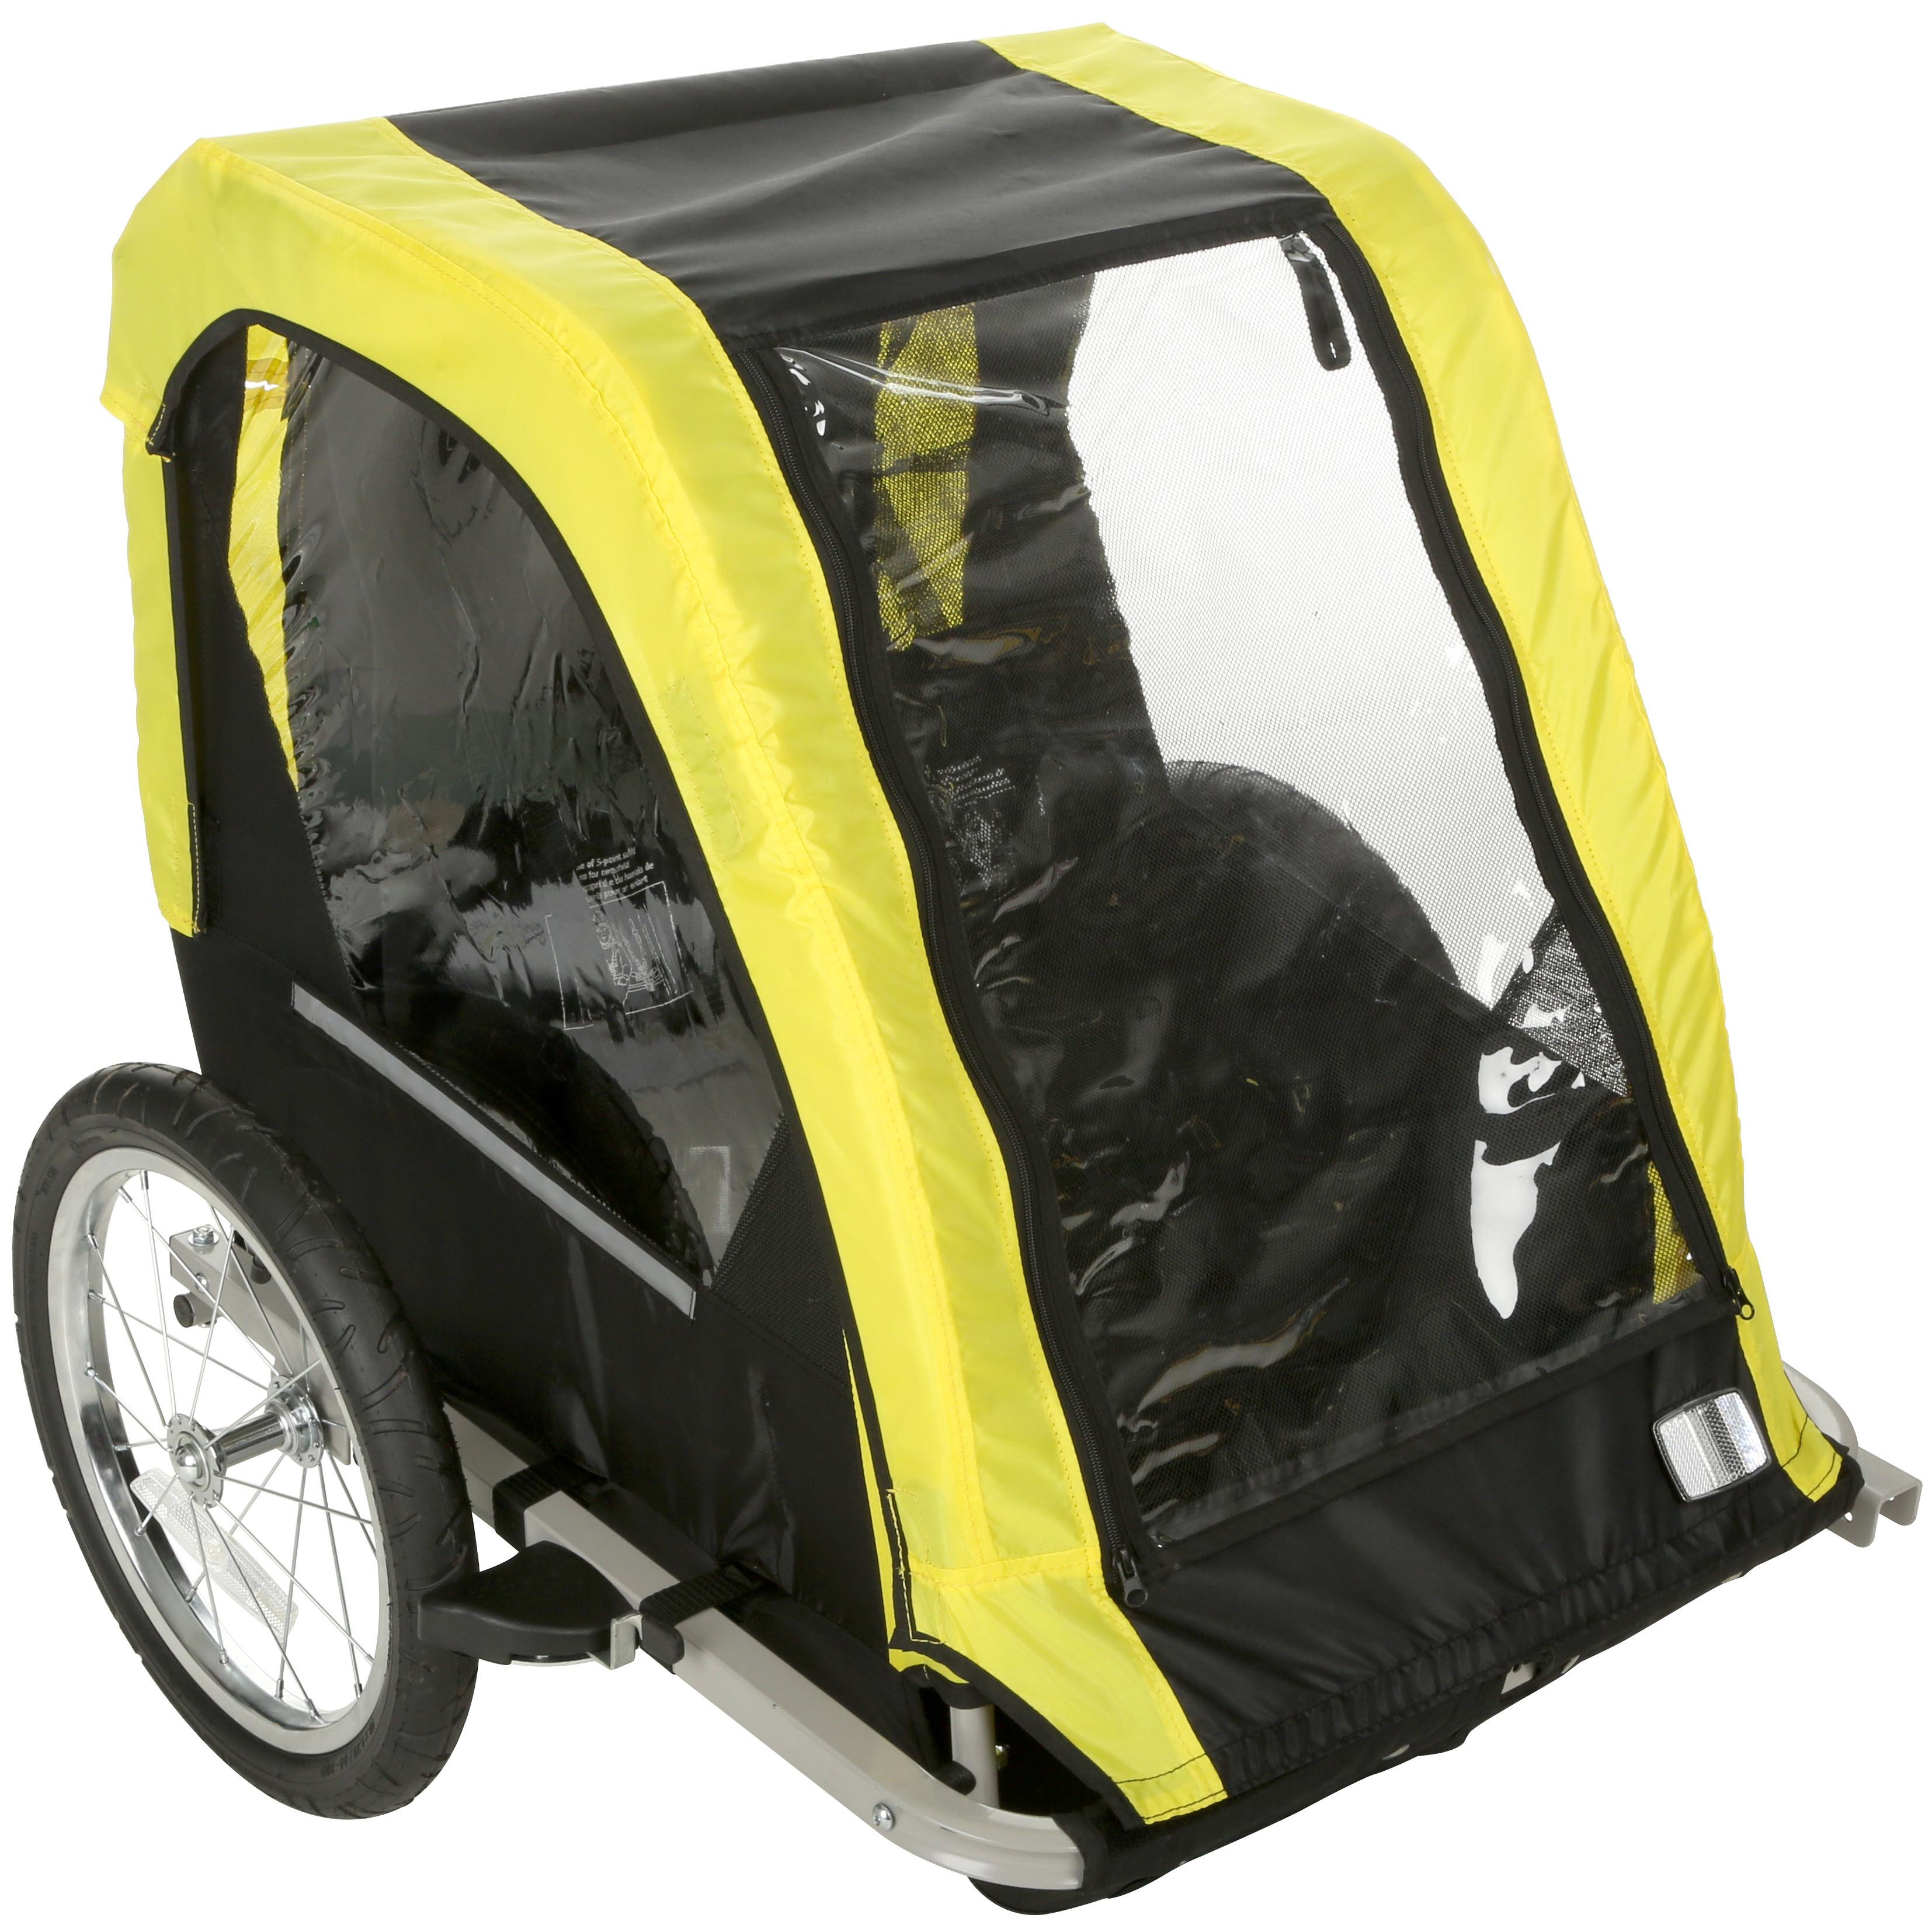 double child bicycle trailer